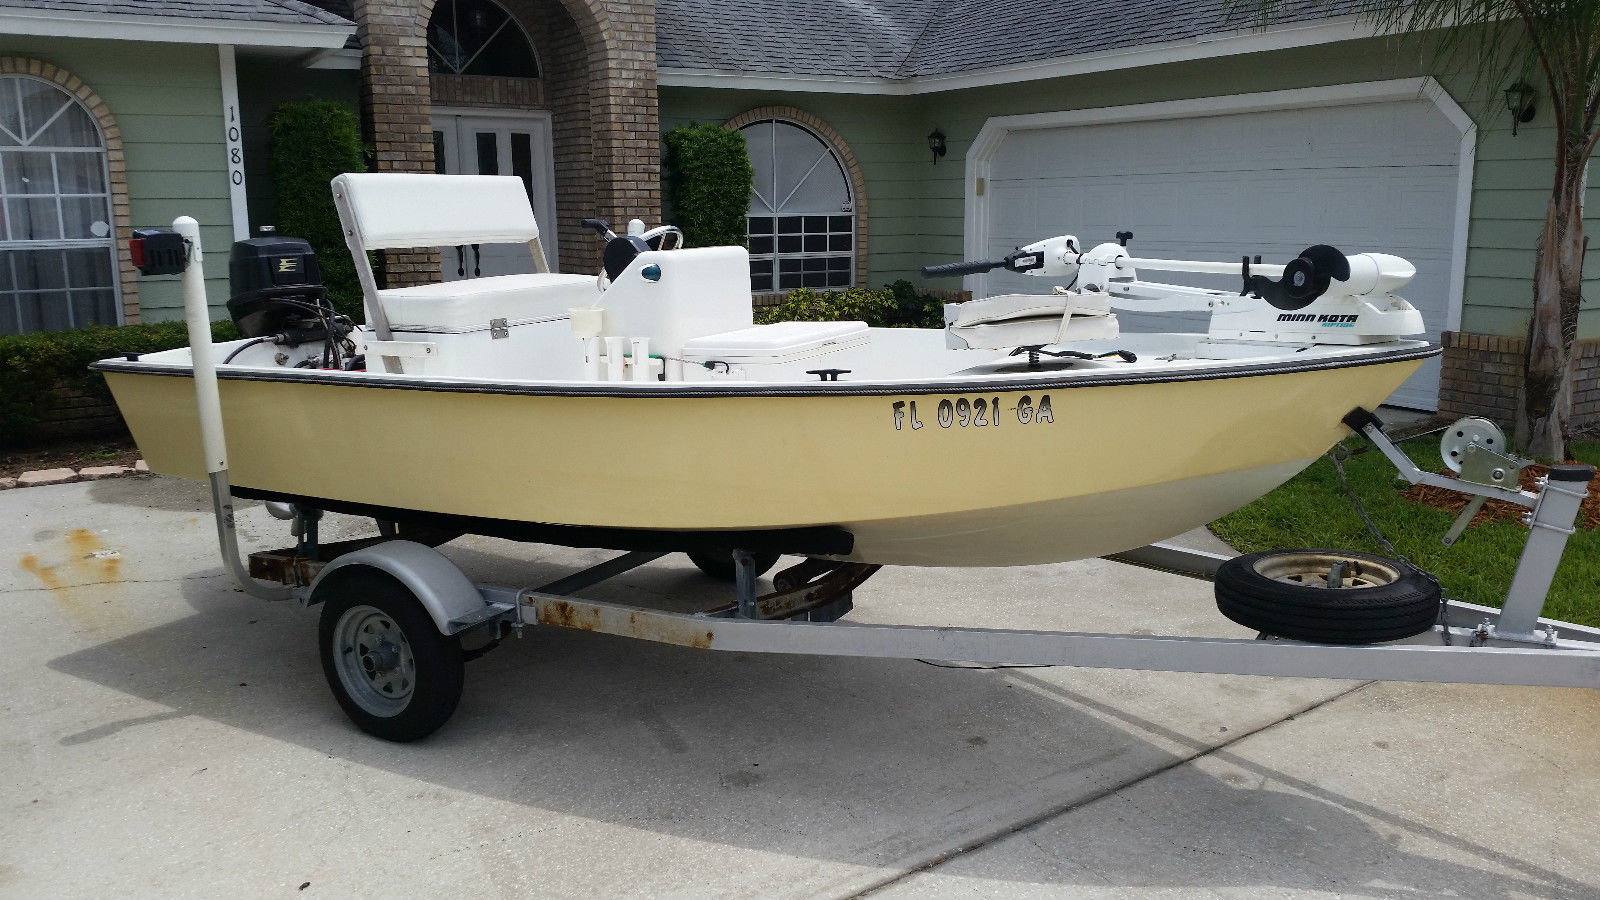 Omni Boats/Hobie Power Skiff boat for sale from USA